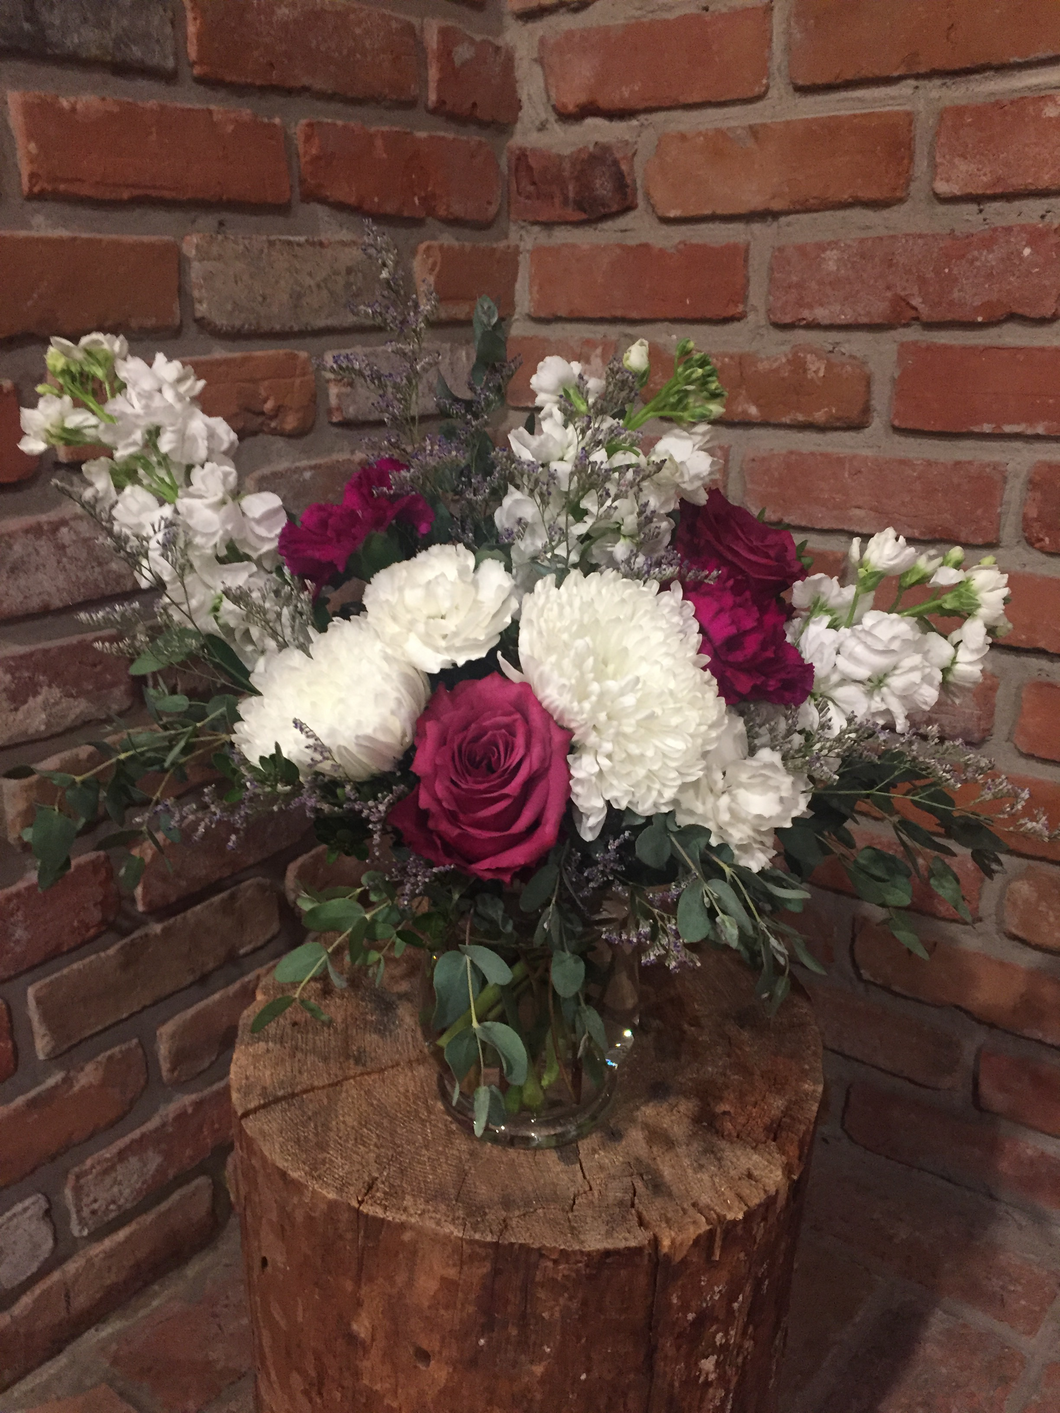 A beautiful garden style vase arrangement including a jumbo white hydrangea, fragrant white stocks, blueberry roses and plum and white carnations. A touch of whispy lavender limonium and an assortment of foliages add loads of texture!